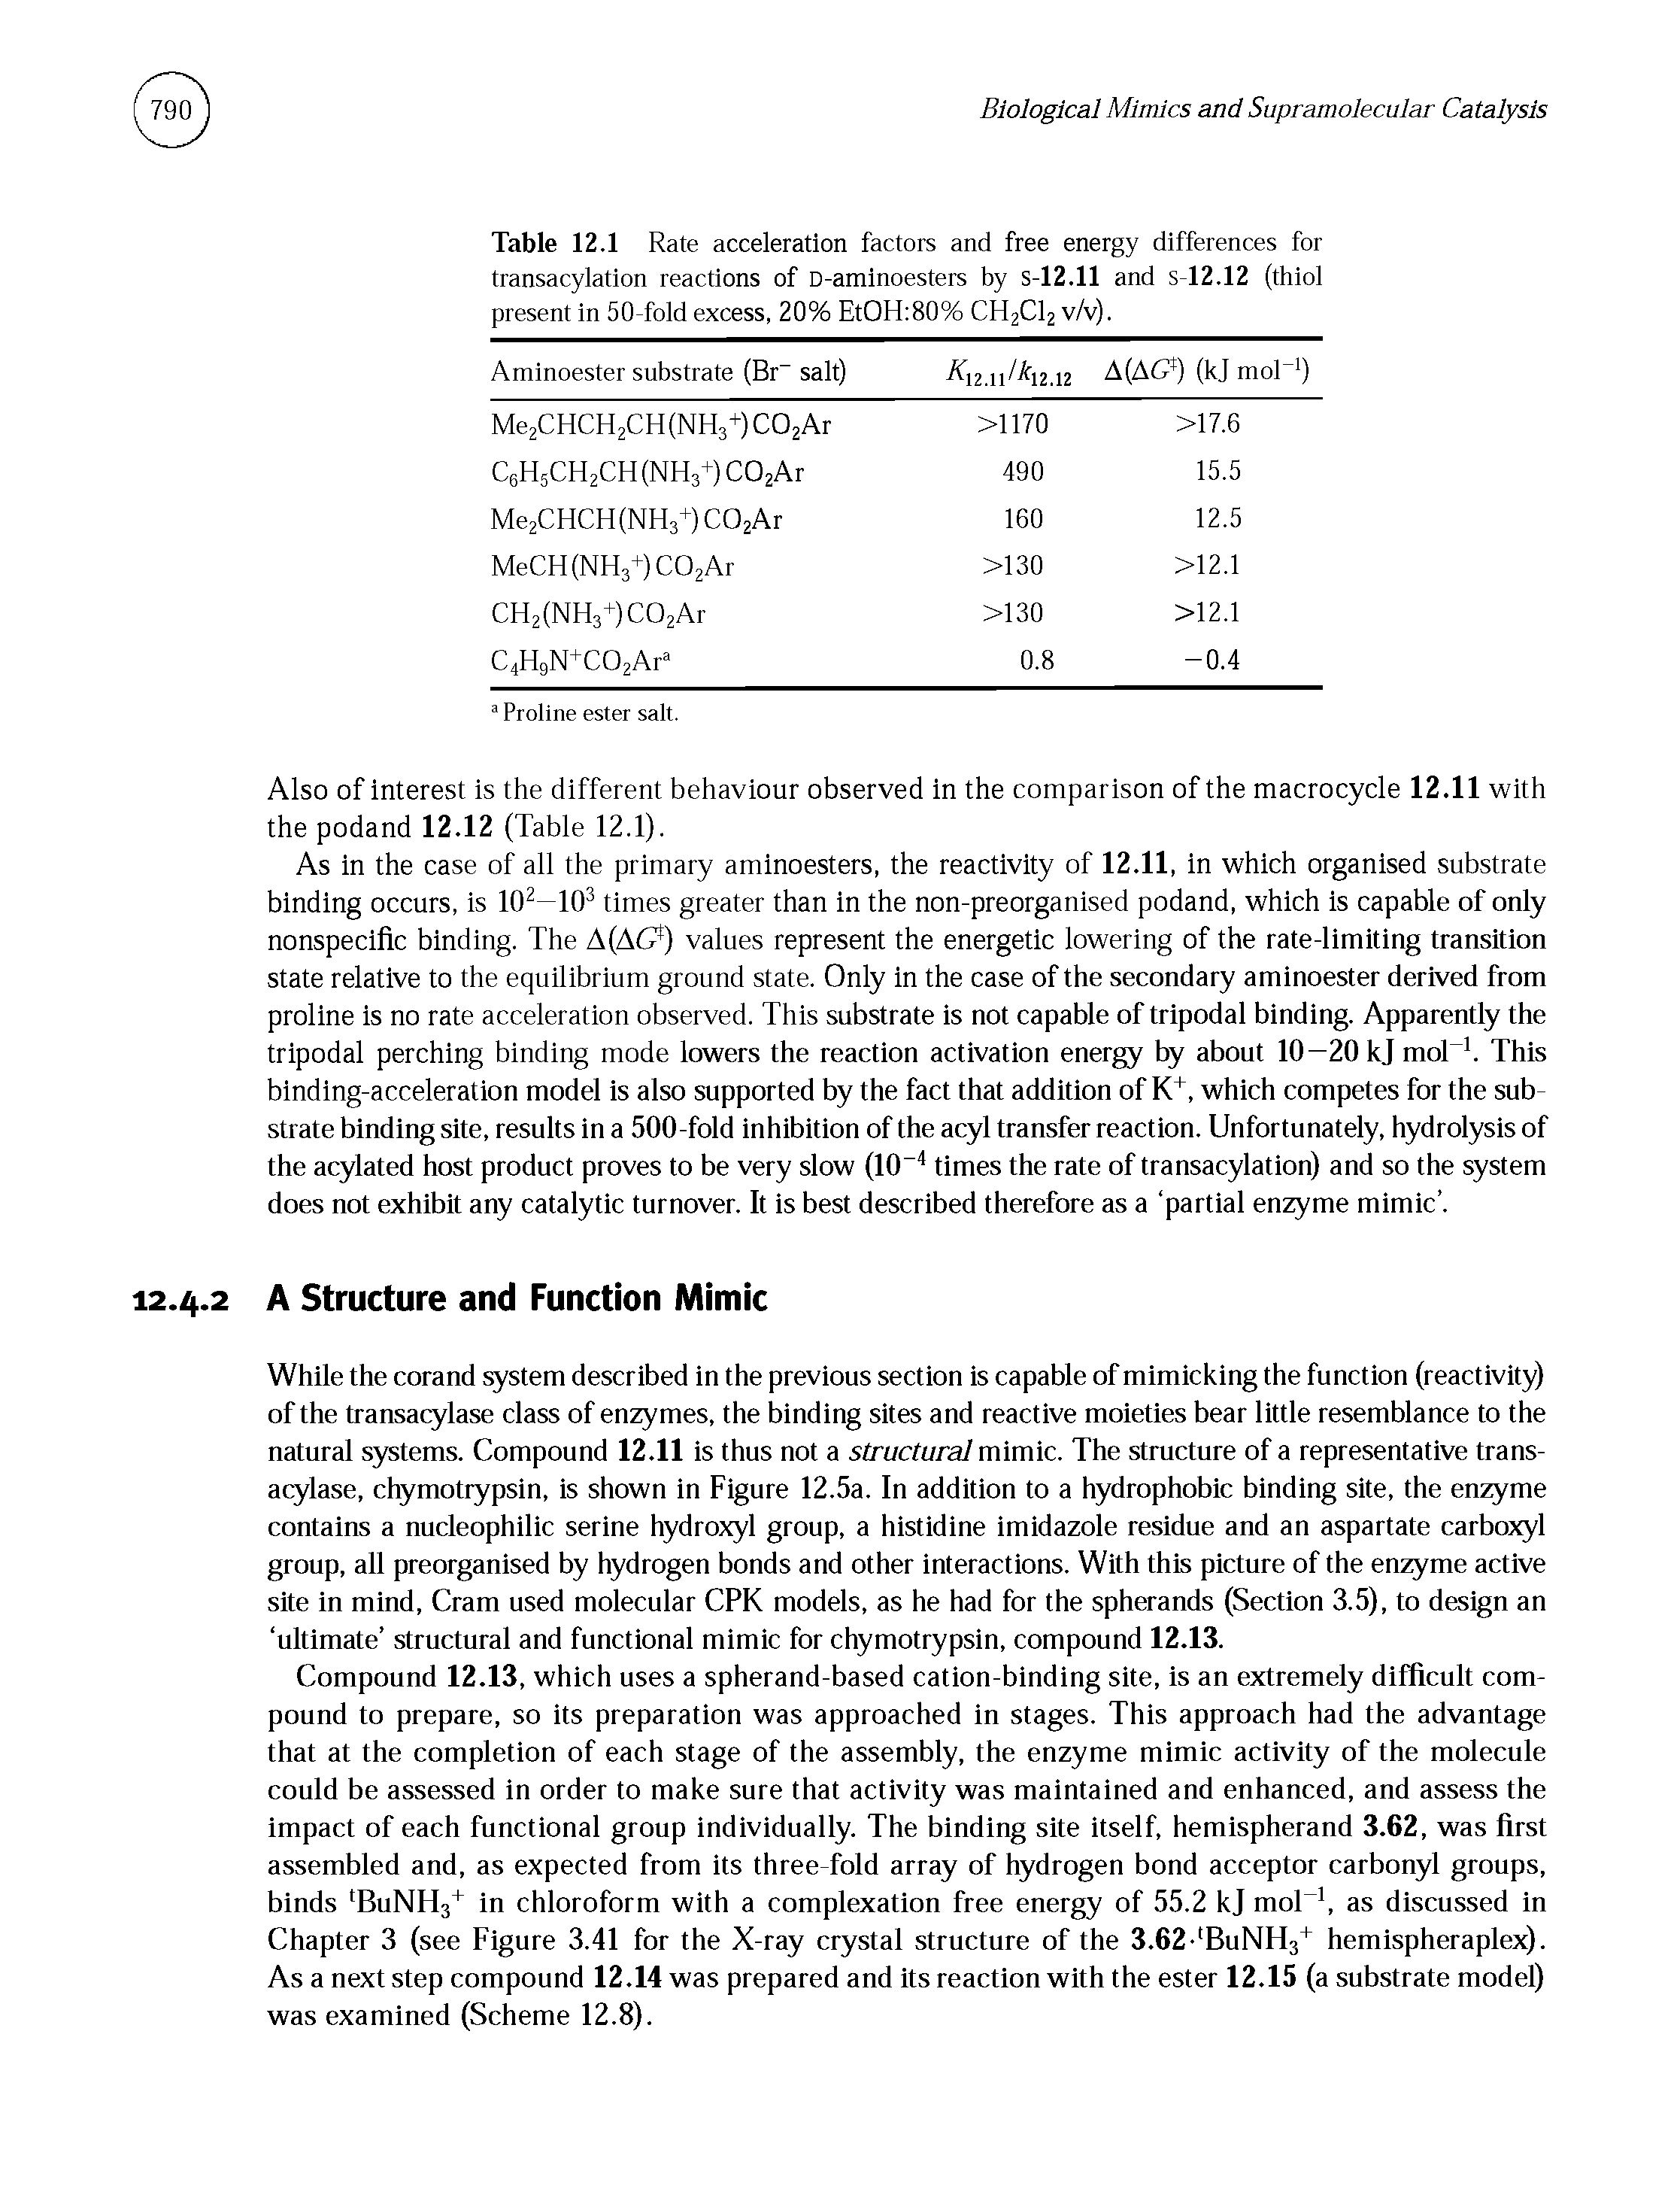 Table 12.1 Rate acceleration factors and free energy differences for transacylation reactions of D-aminoesters by S-12.11 and s 12.12 (thiol present in 50-fold excess, 20% EtOH 80% CH2C12 v/v).